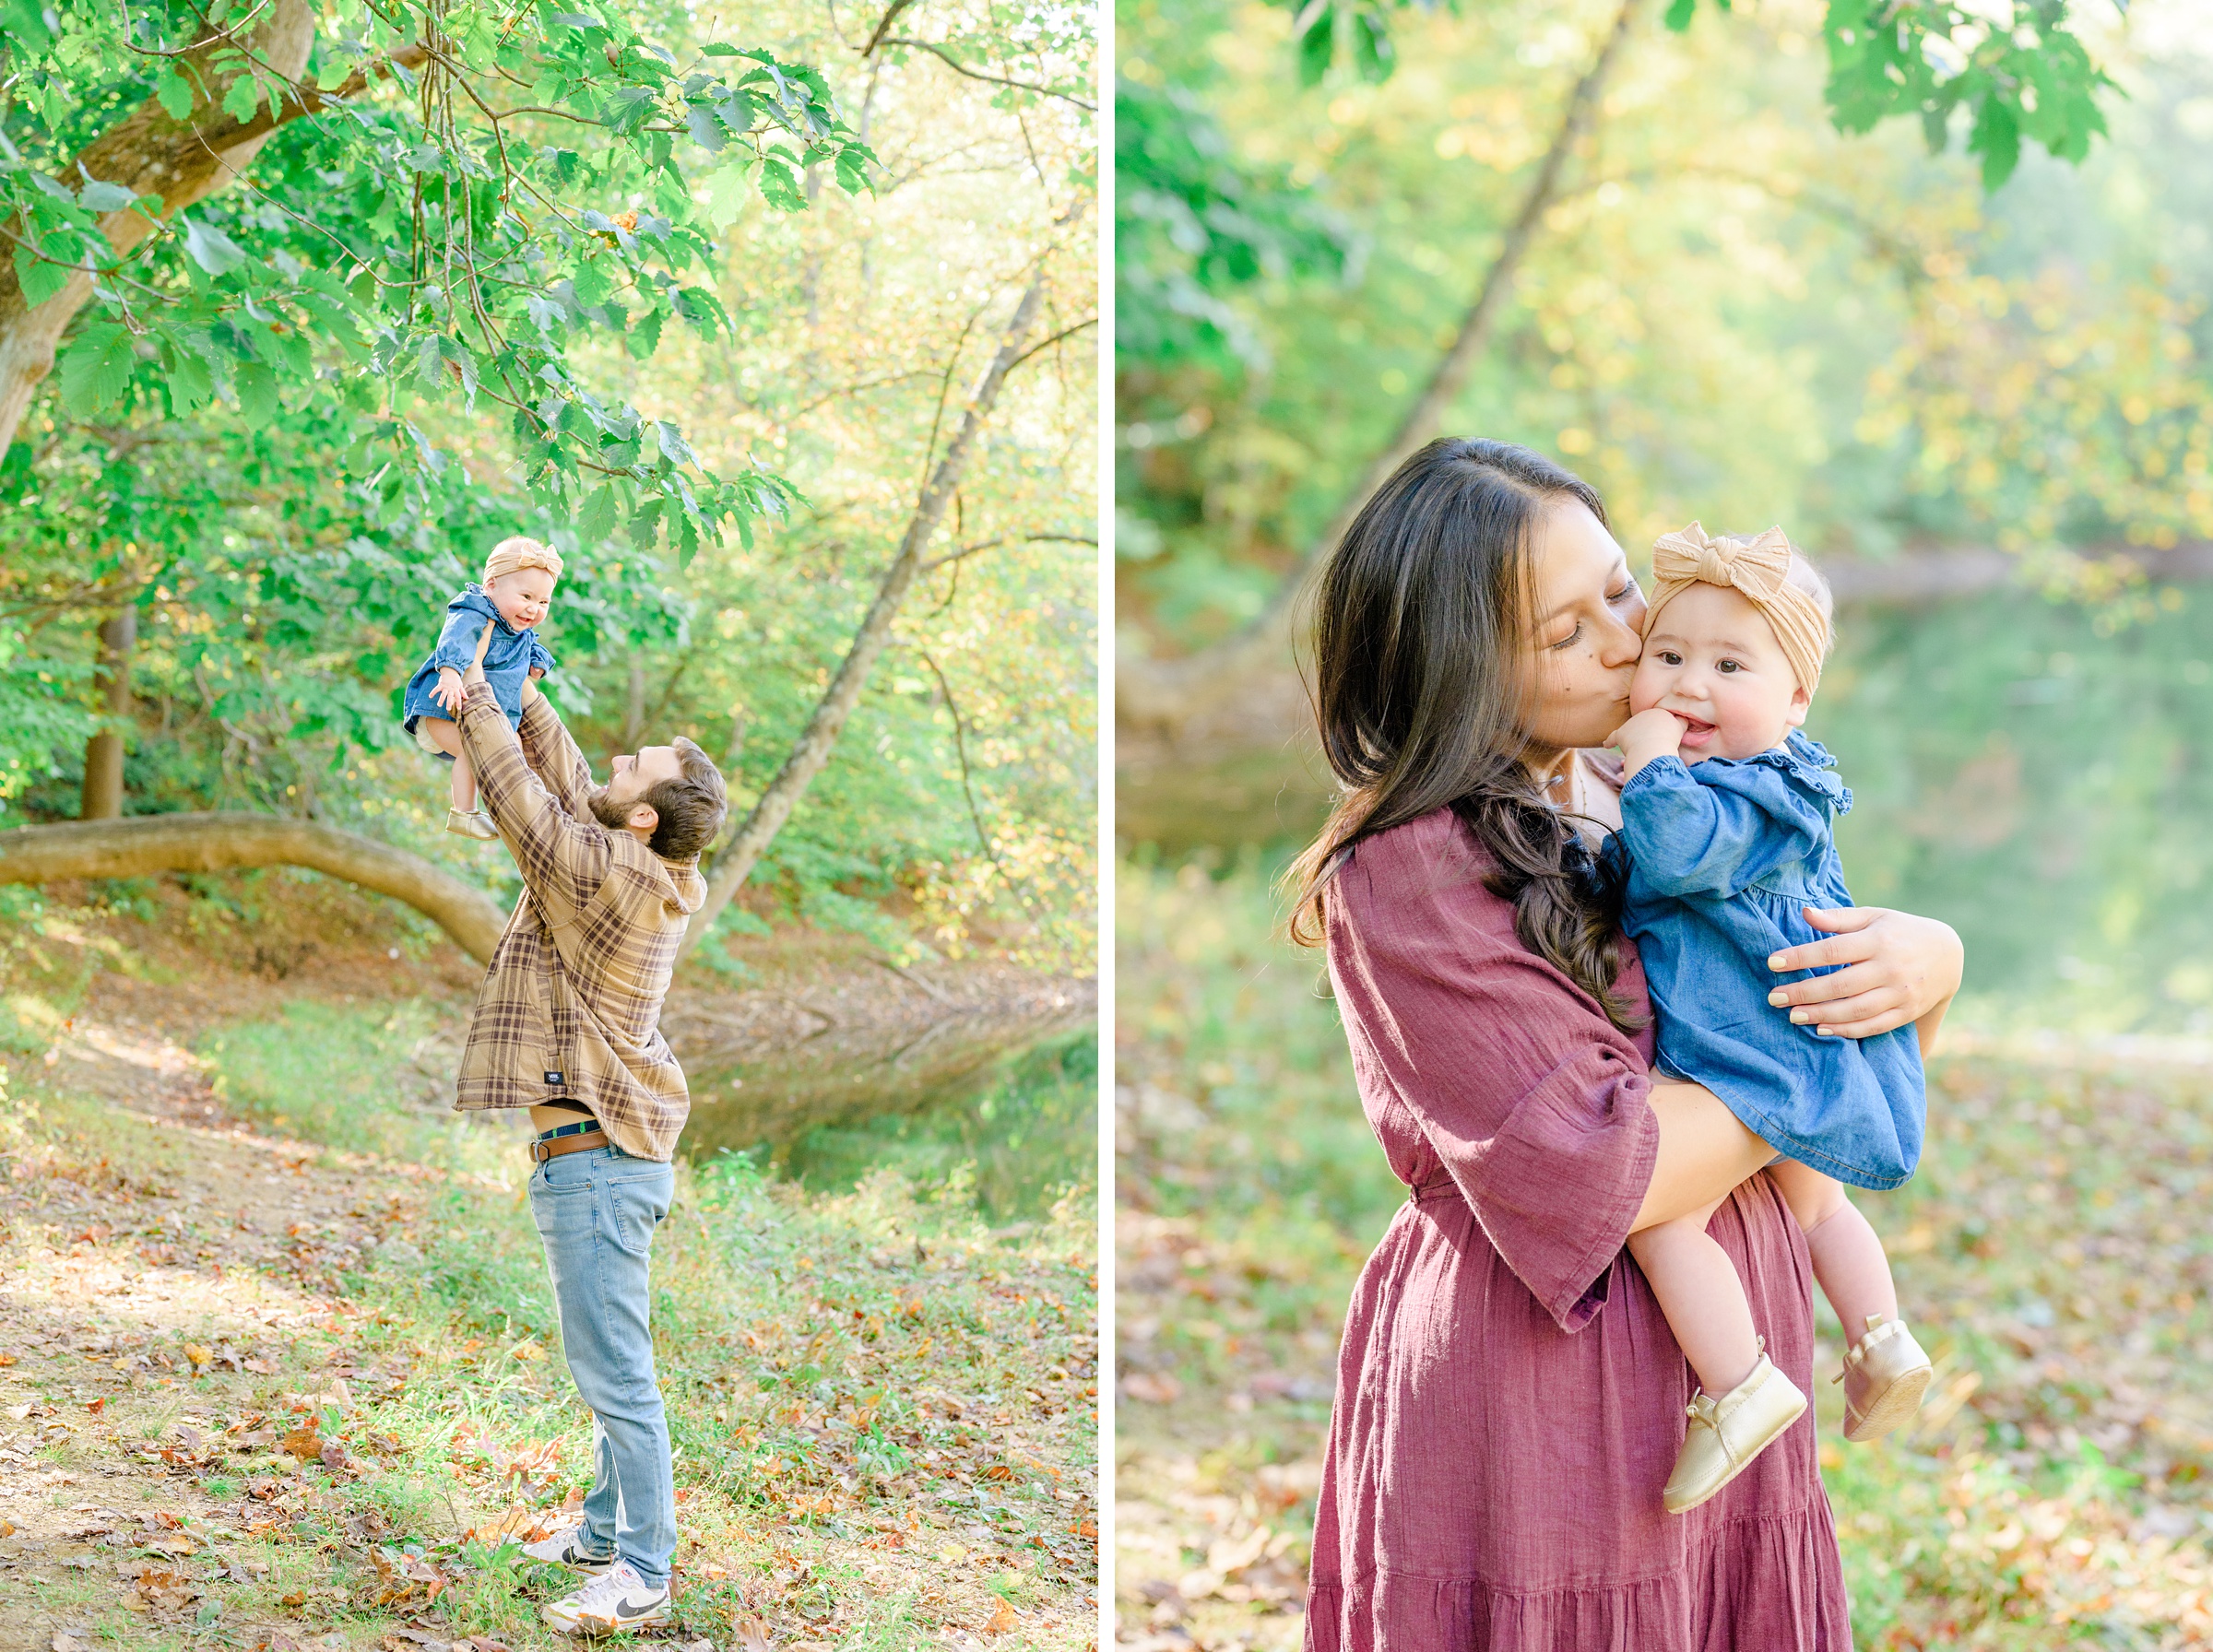 Family photo session in Hunt Valley, MD photographed by Baltimore Portrait Photographer Cait Kramer.